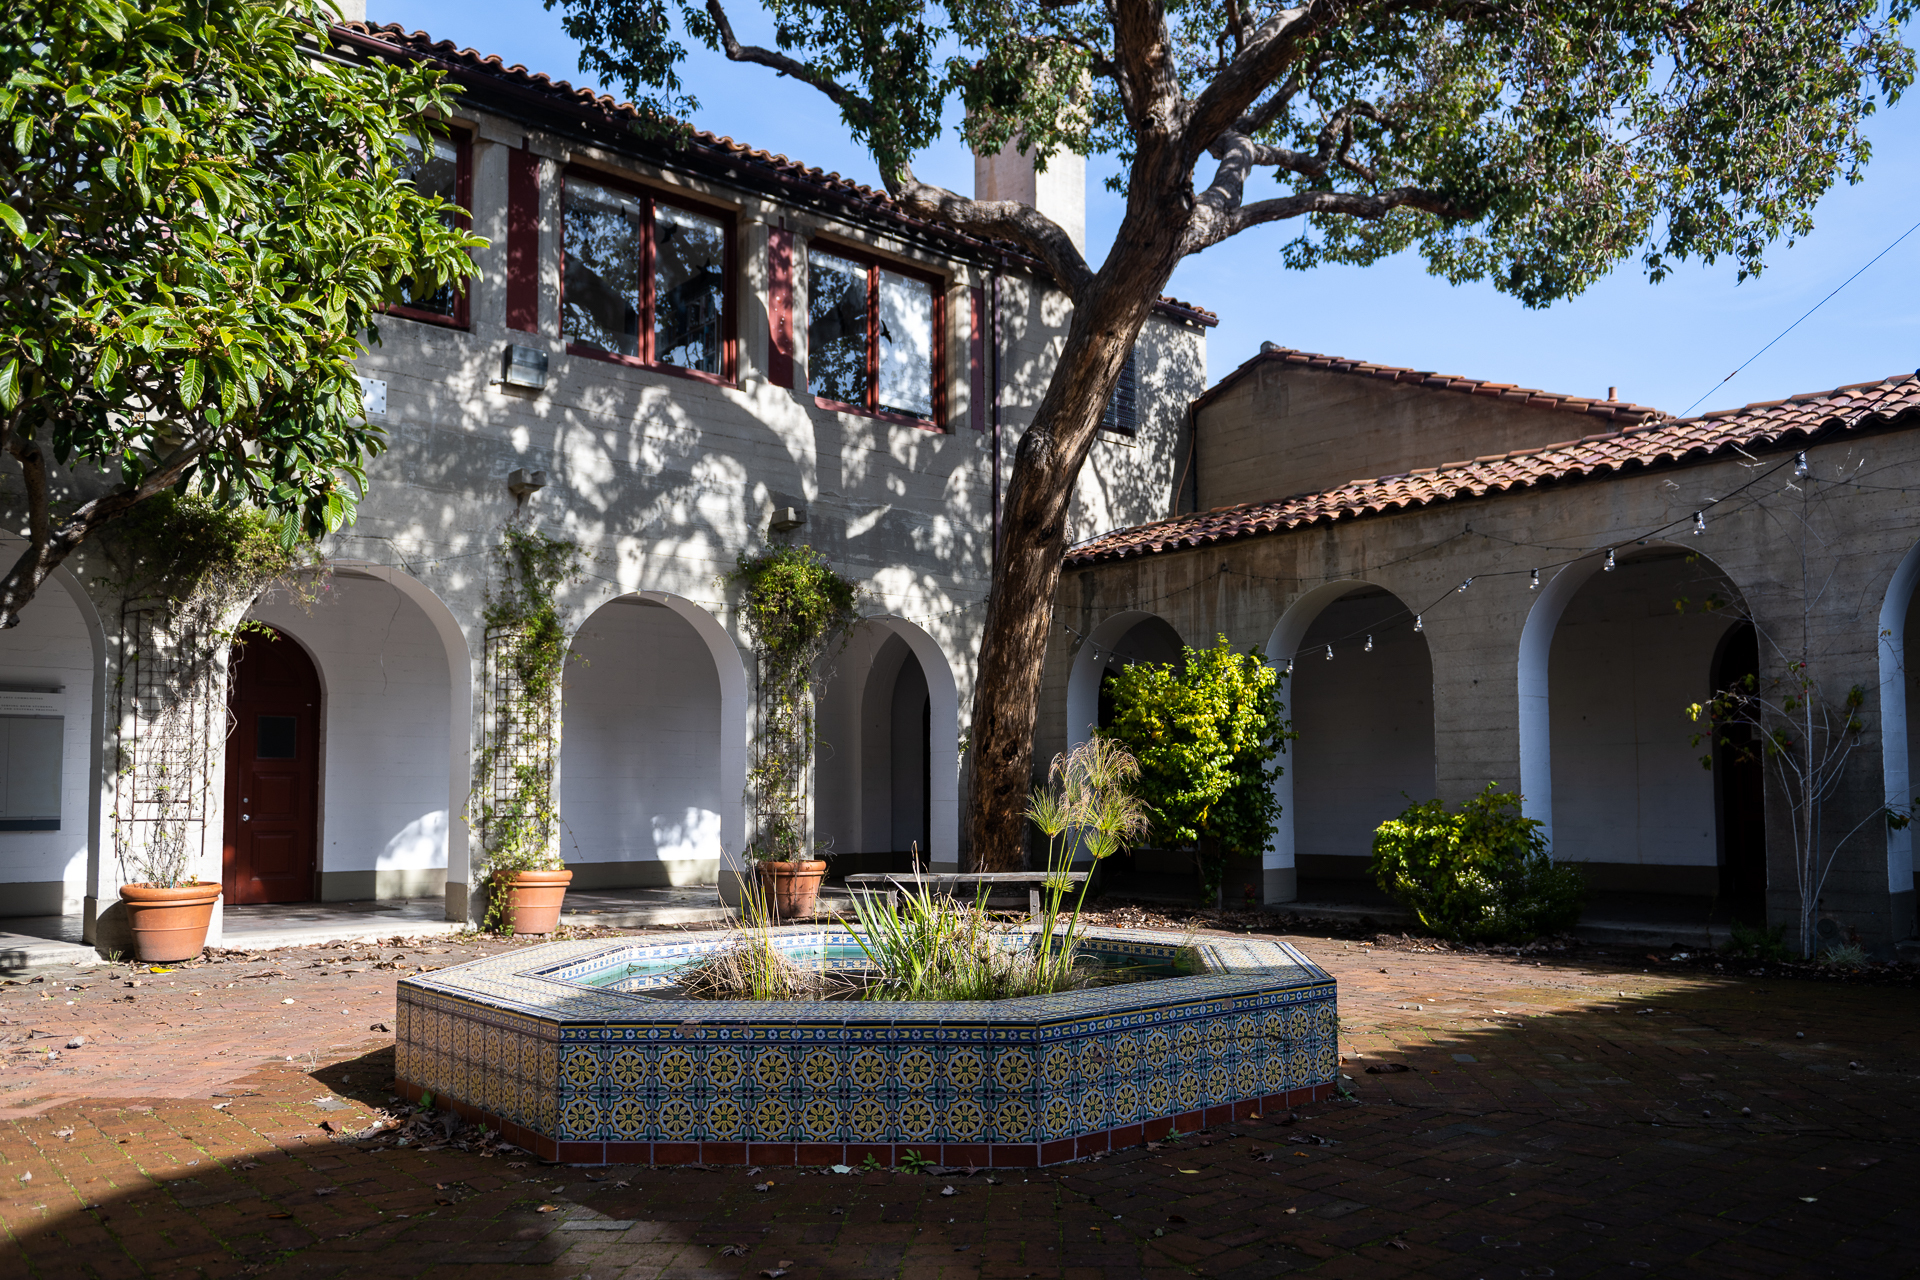 Empty Italianate courtyard with trees, fountain and shadows